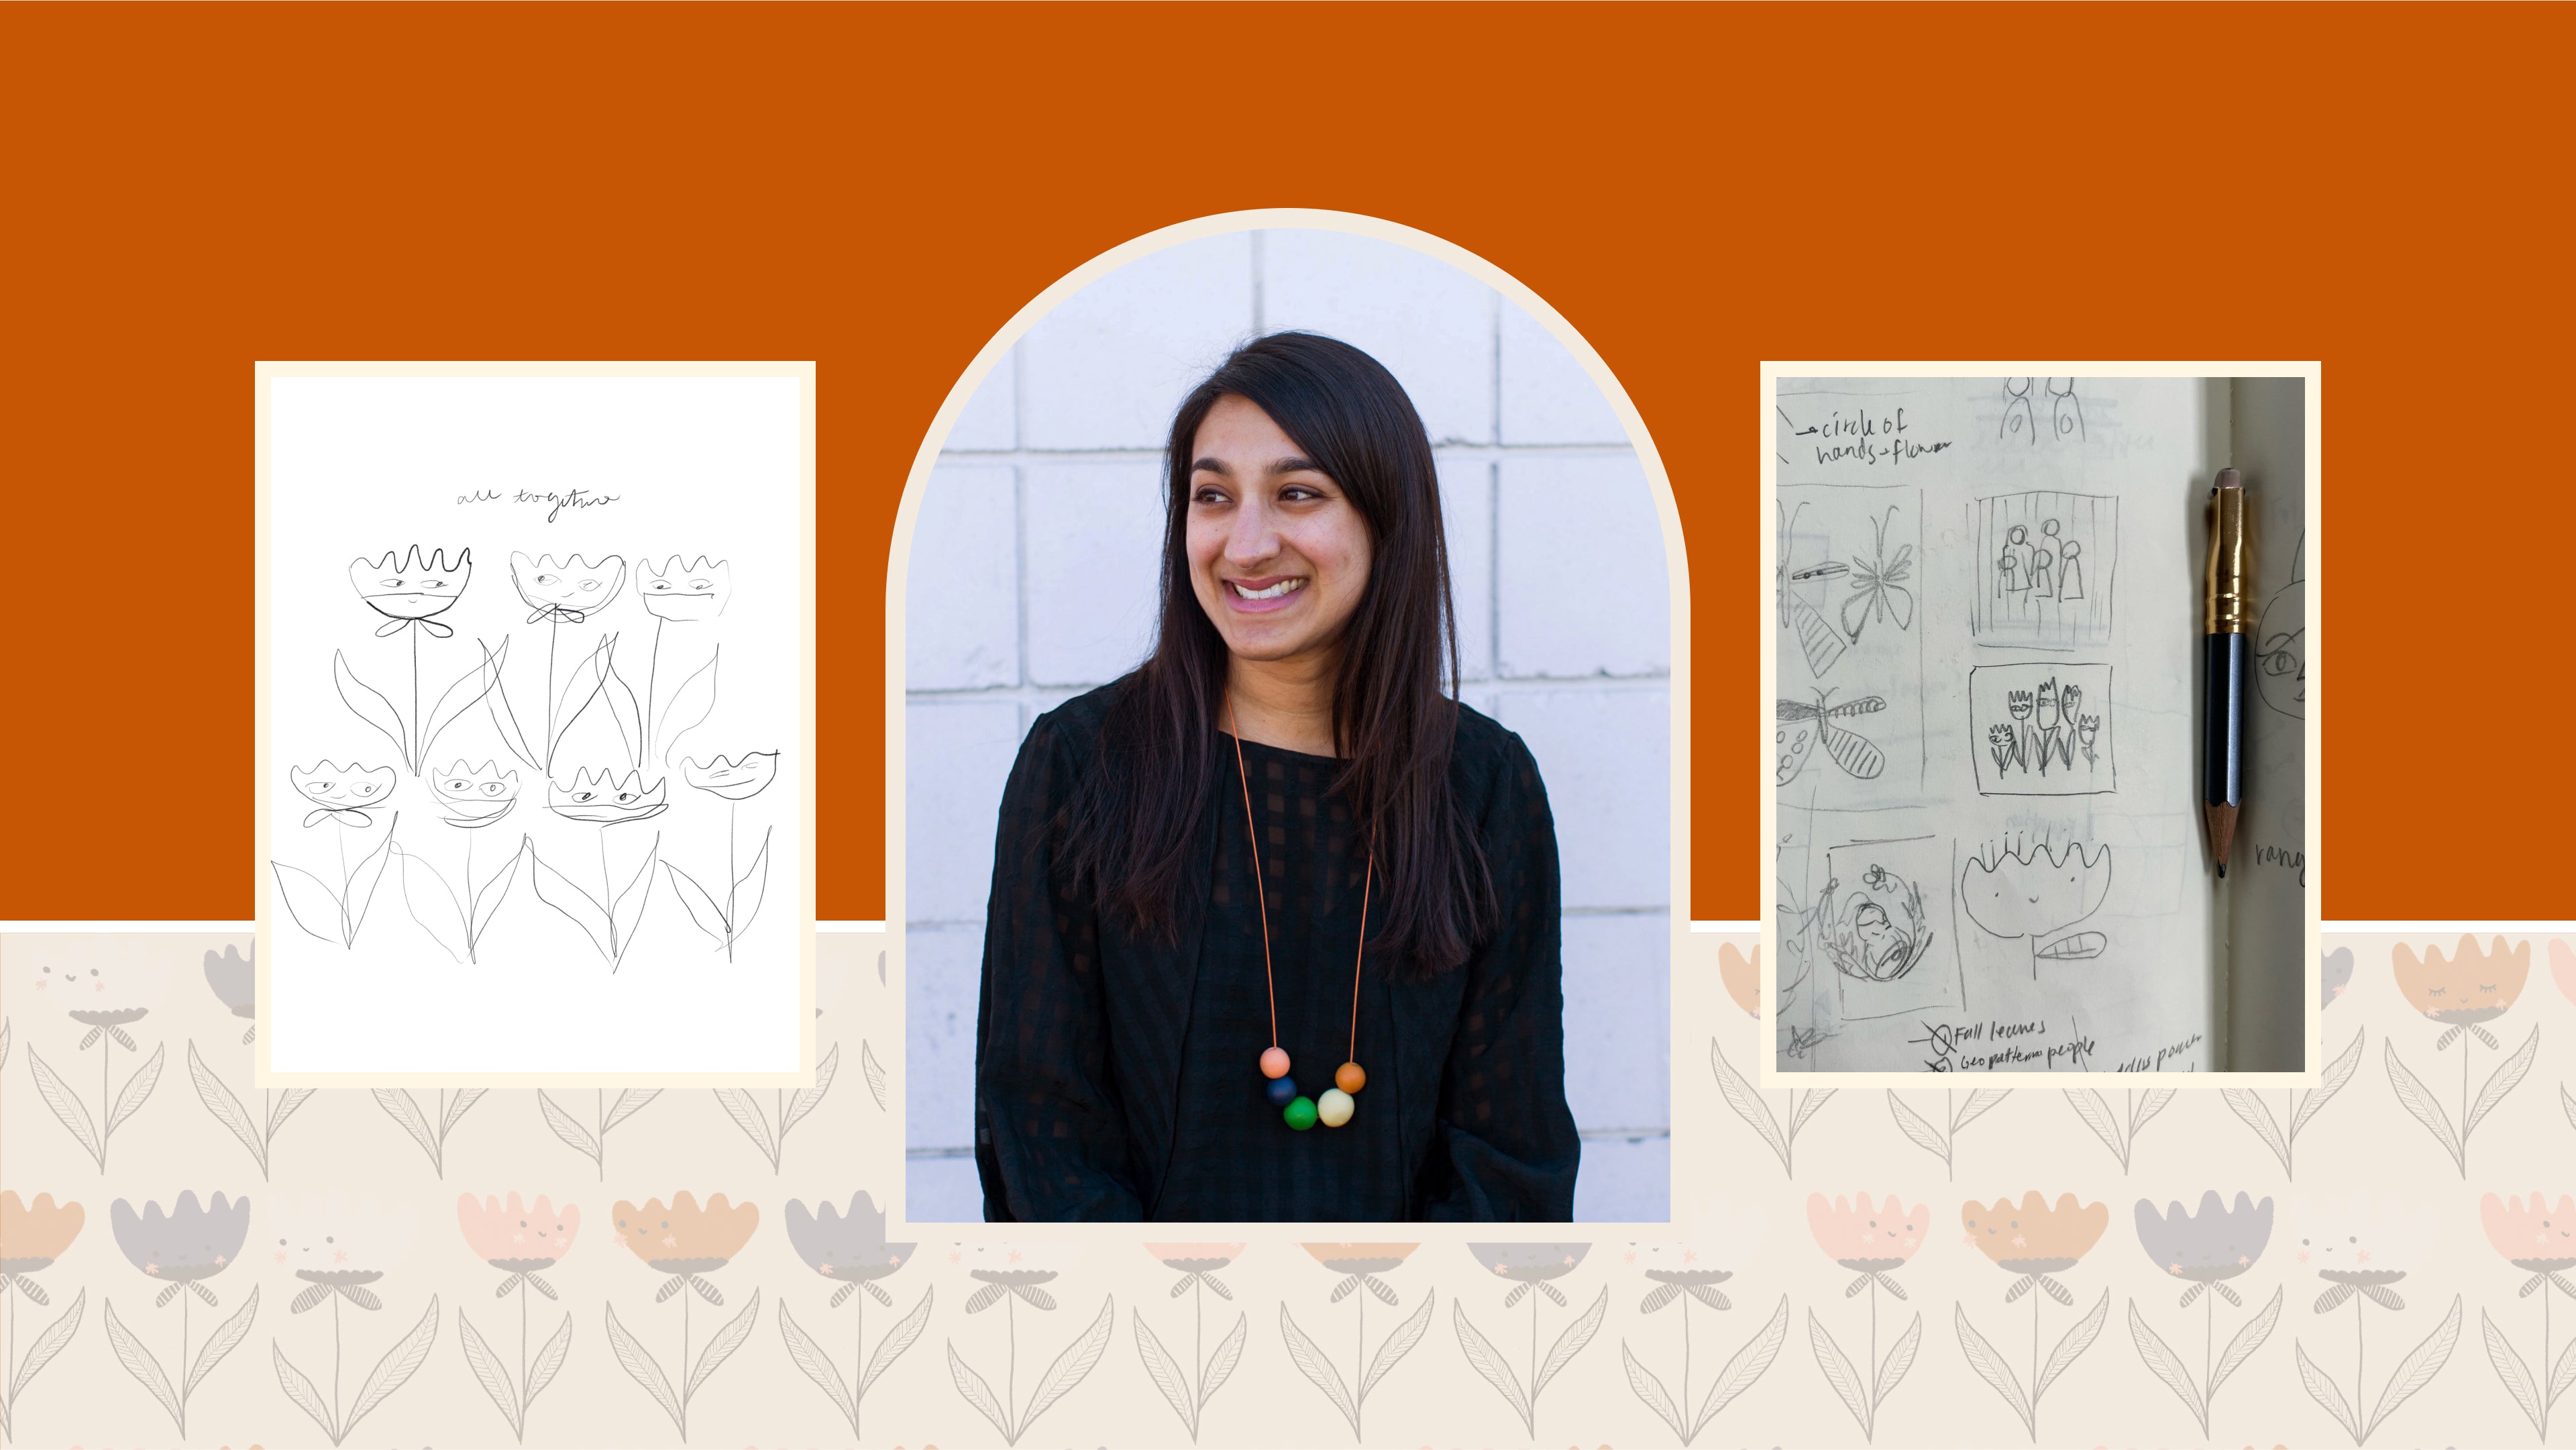 Photo of Meenal Patel with images of Flower Friends sketches on both sides